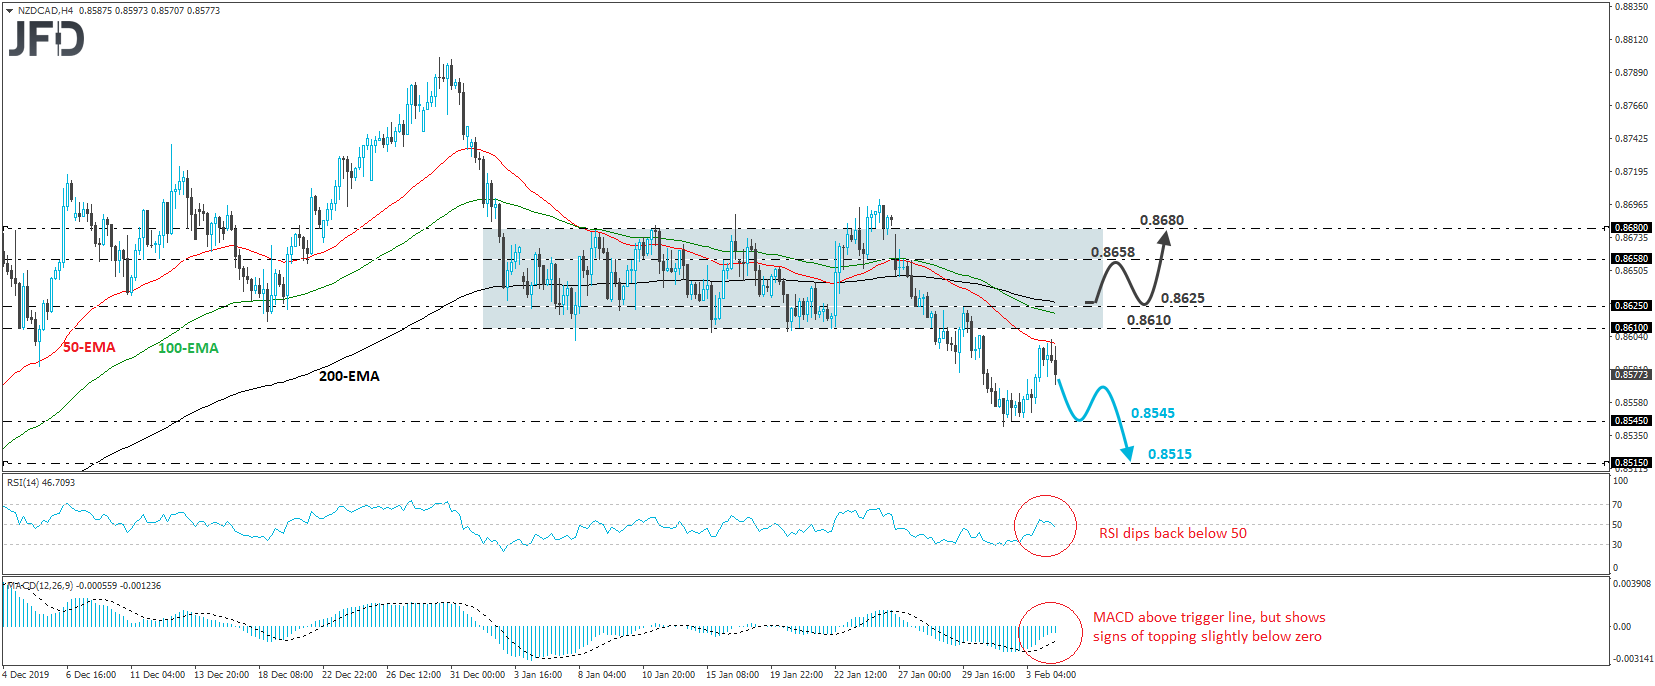 NZD/CAD 4-hour chart technical analysis